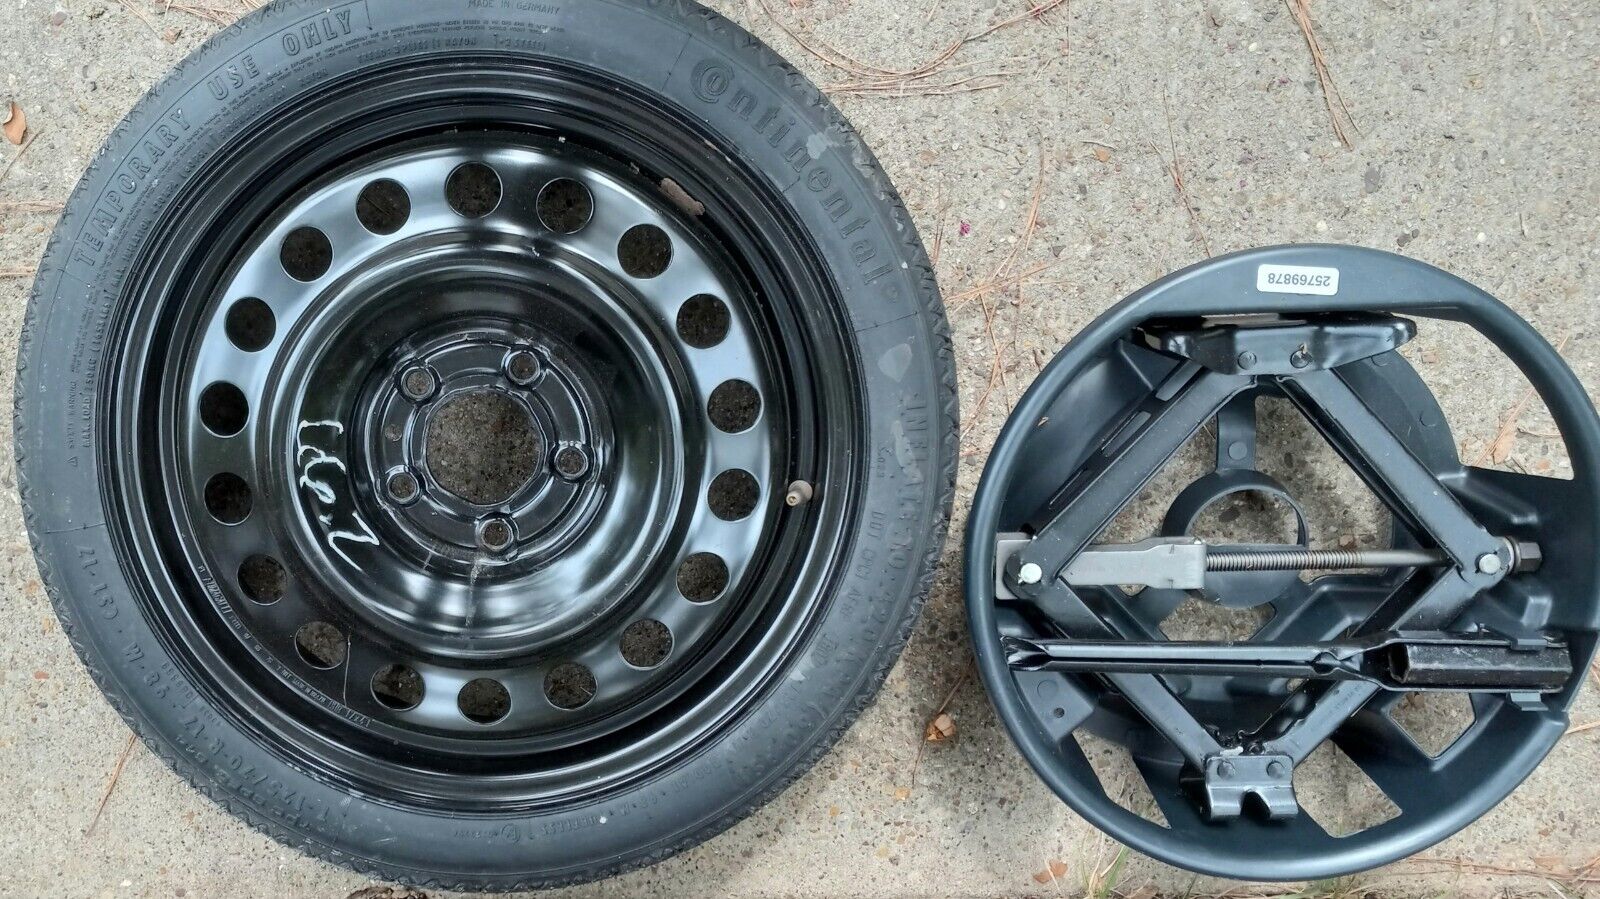 Spare Tire Compact Donut Wheel, Jack, Tools NEVER USED  from 2008 Cadillac DTS